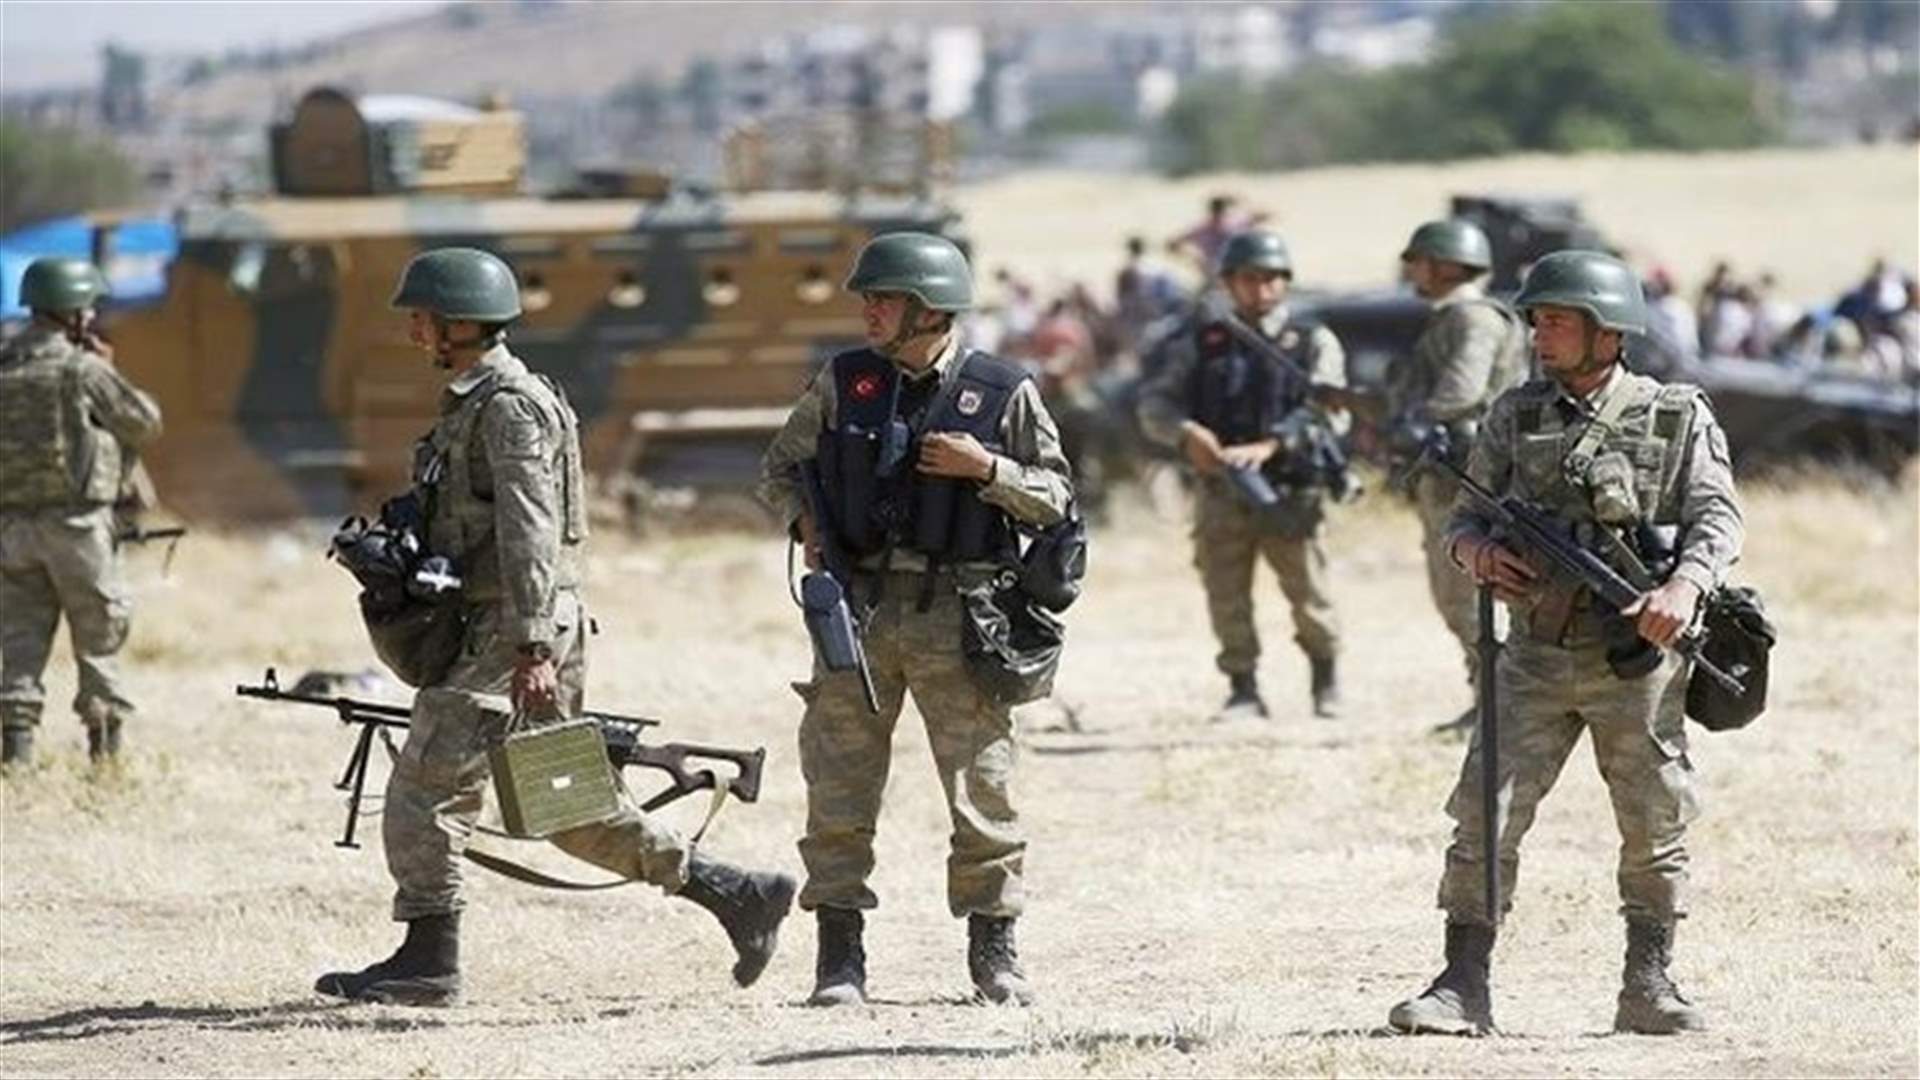 One Turkish soldier killed, four wounded in clashes with Kurdish militants - army